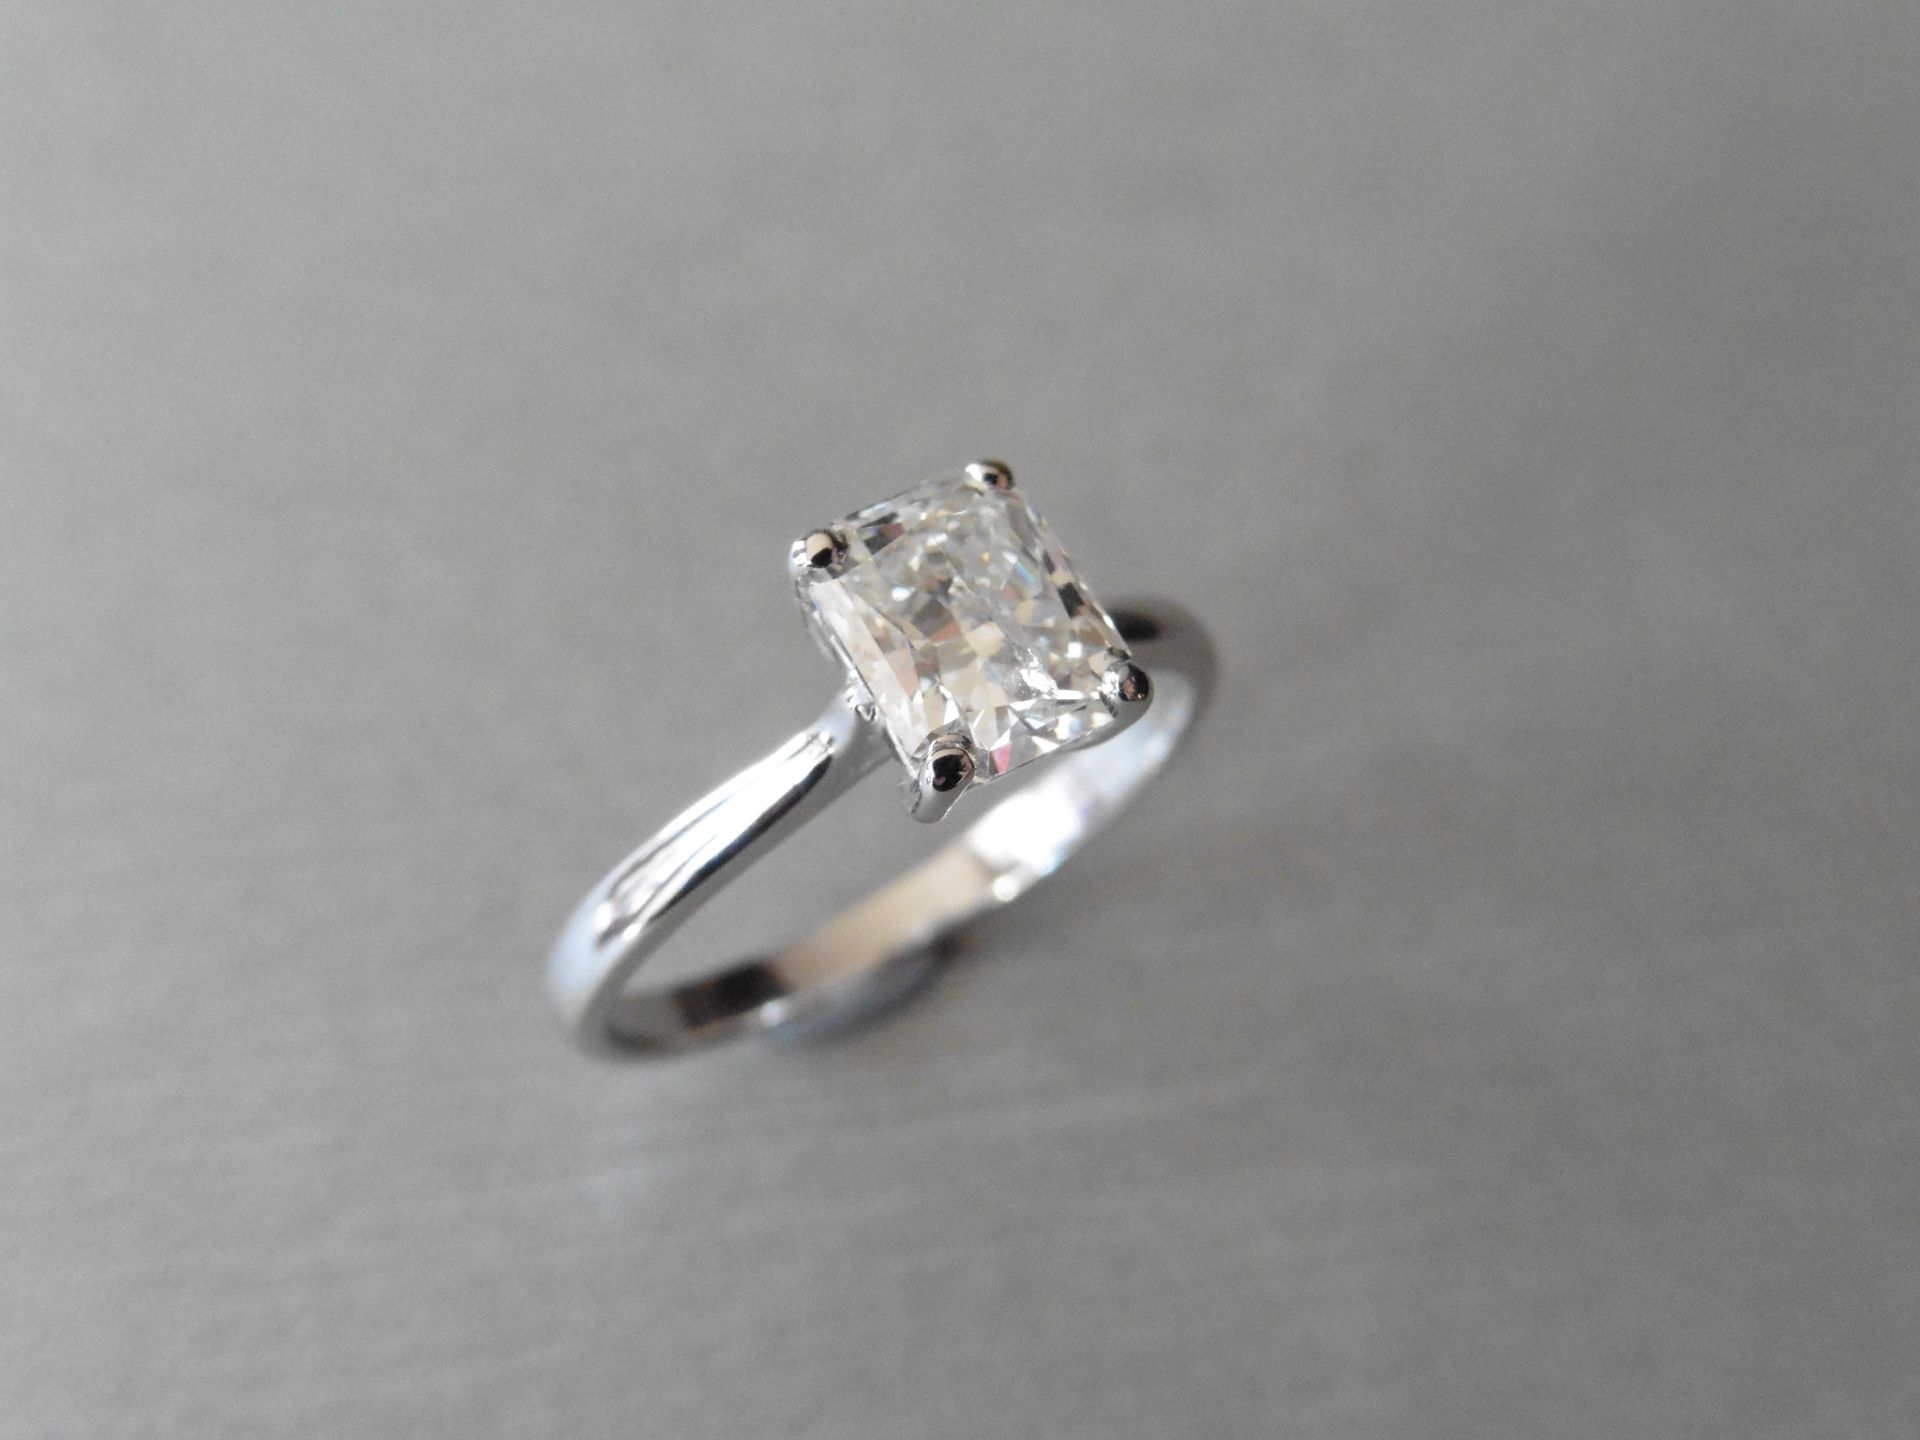 2.14ct Radiant cut diamond,si2 clarity I colour good cut,18ct white gold setting 3.8gms,size L, - Image 3 of 5